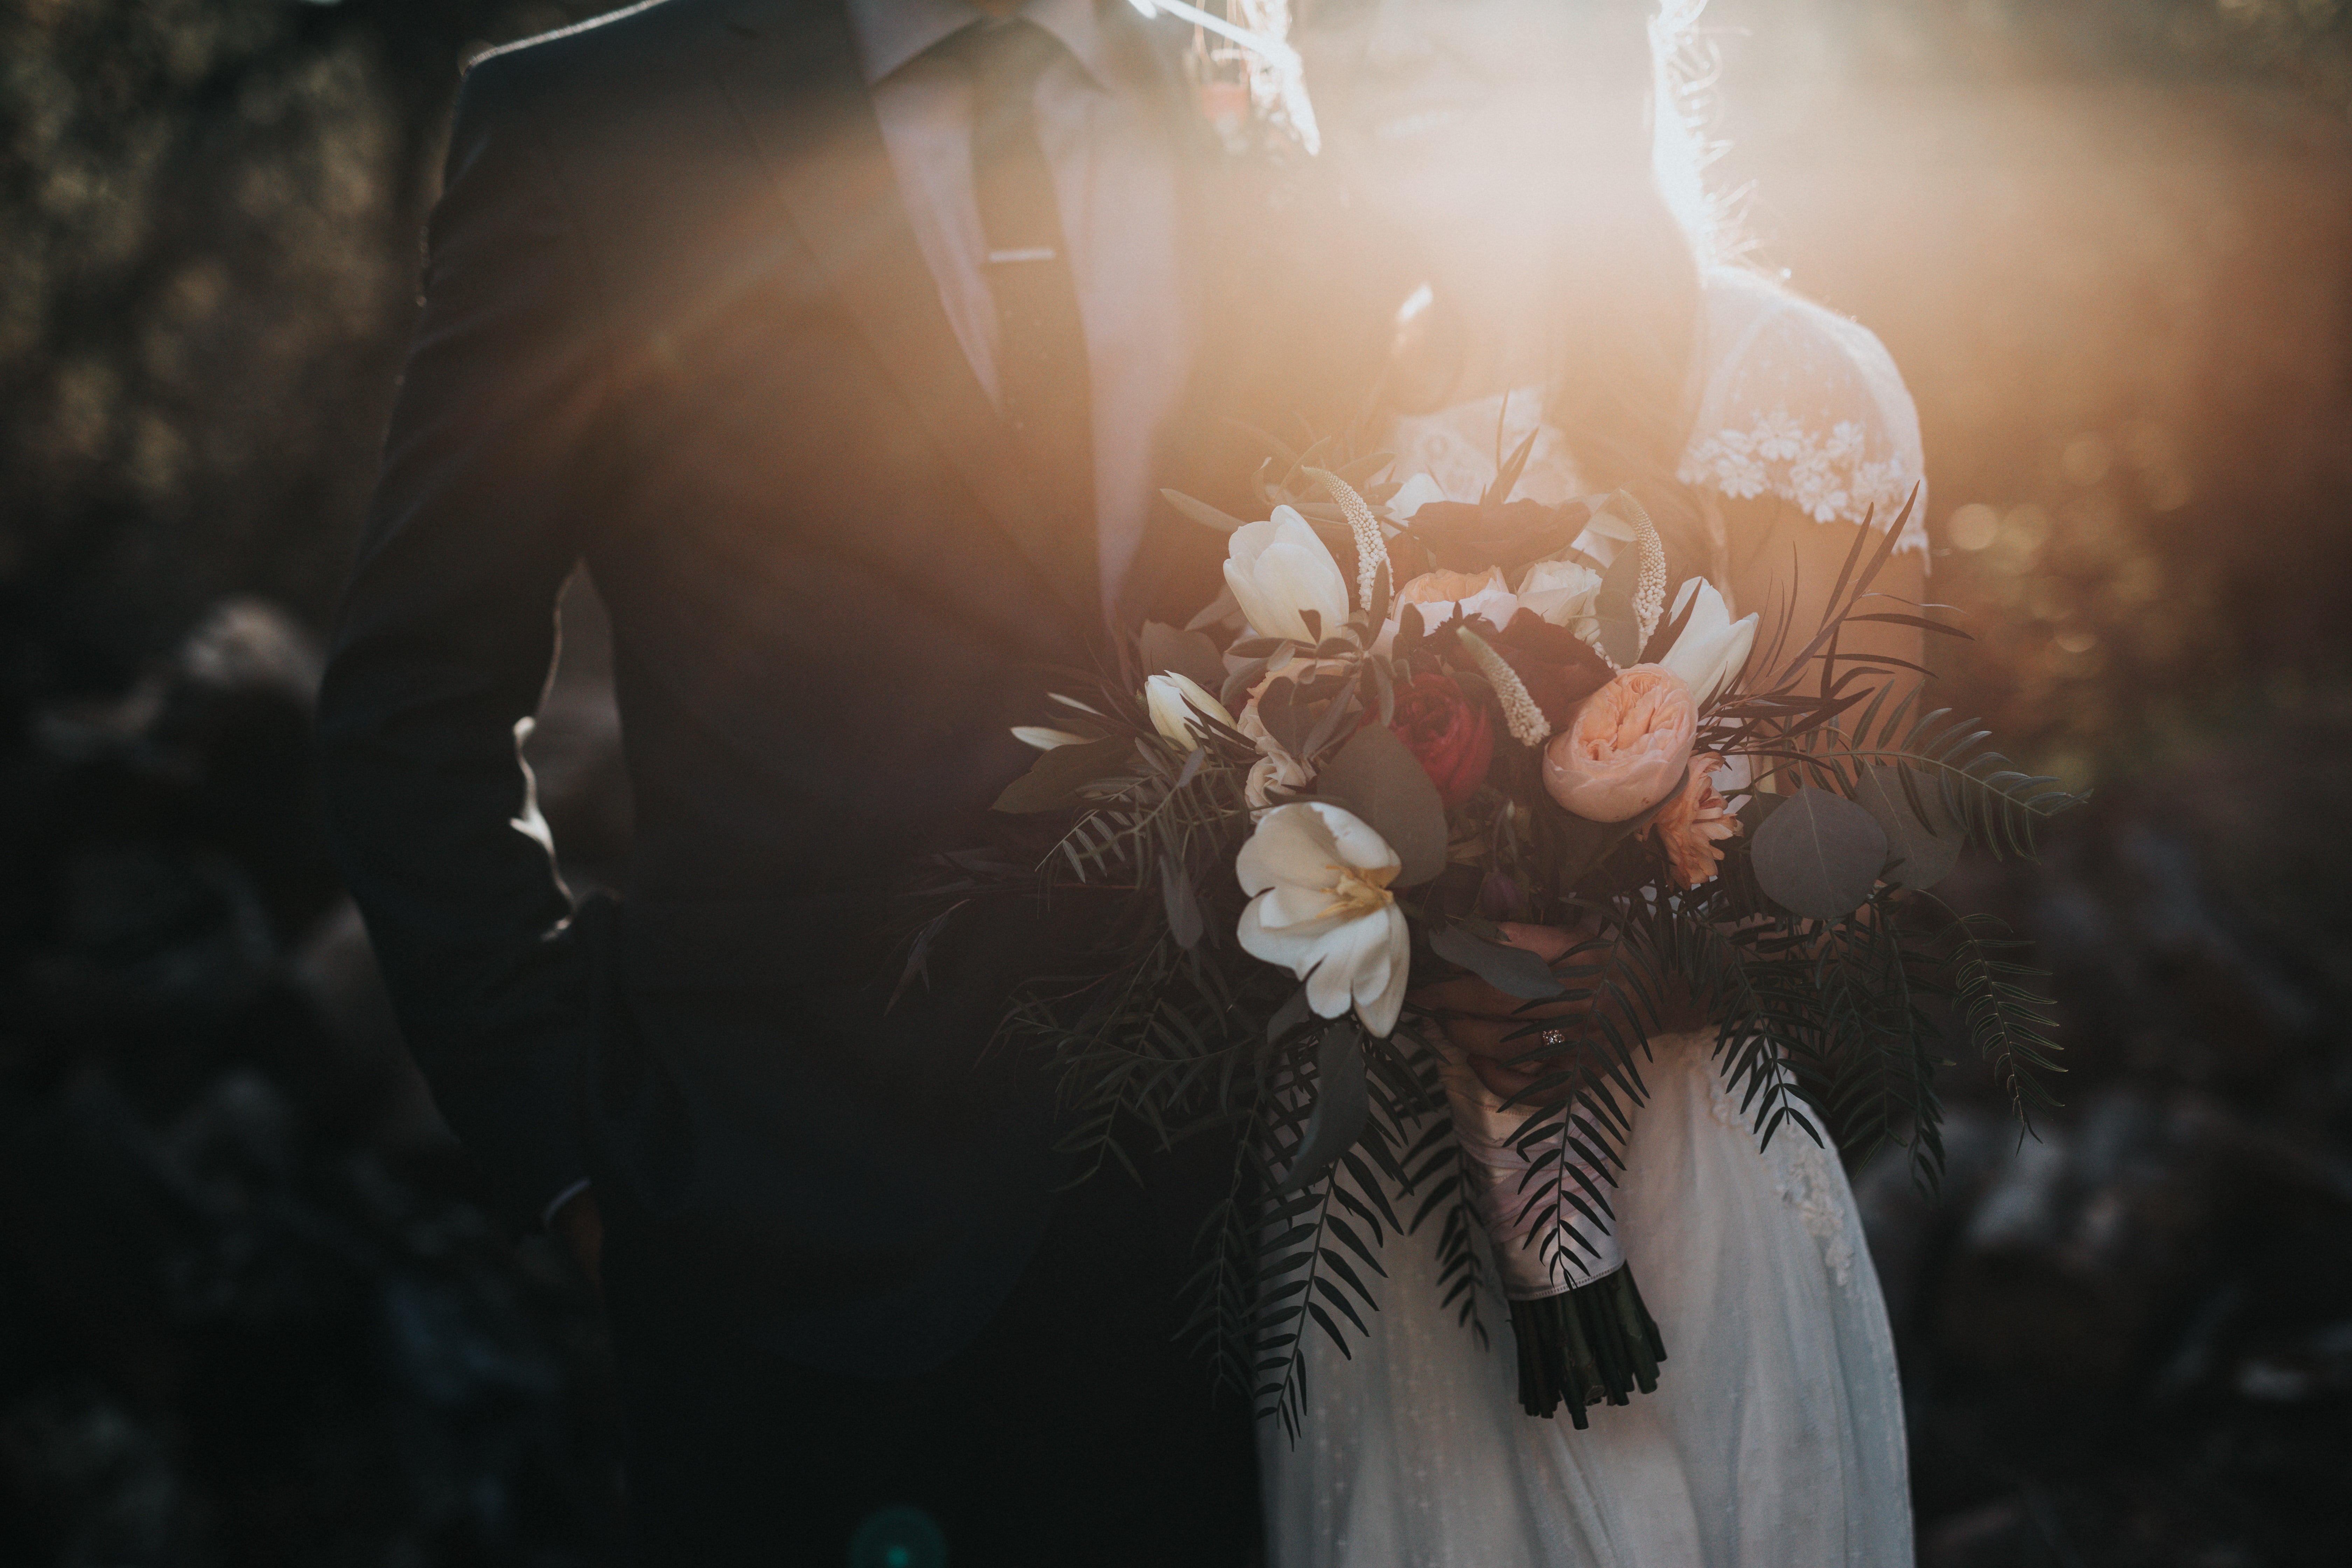 Ashley fell in love with Eric & had married him with her father's blessings. | Source: Unsplash 